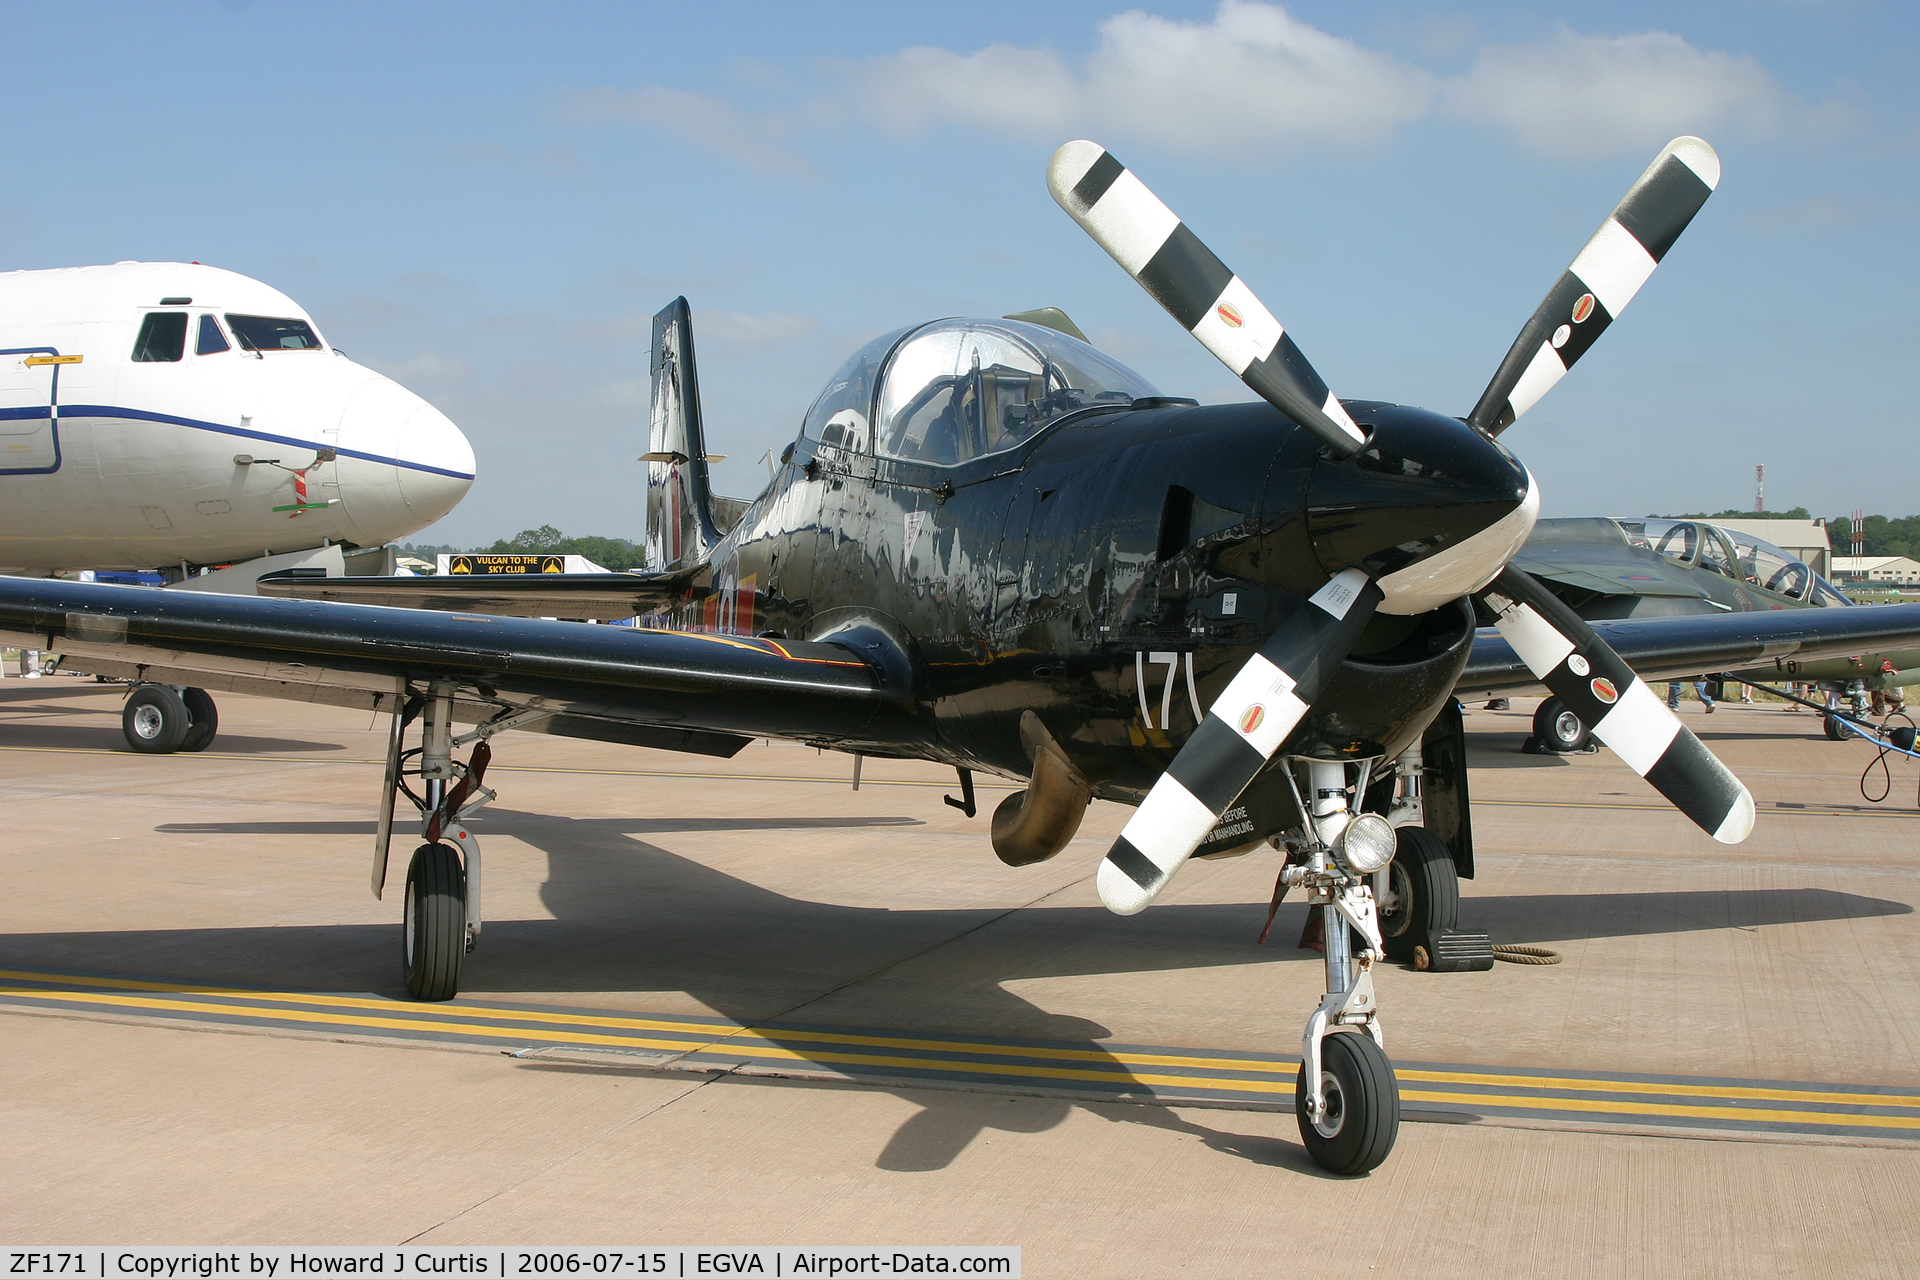 ZF171, 1989 Short S-312 Tucano T1 C/N S023/T23, RIAT 2006; on static display.